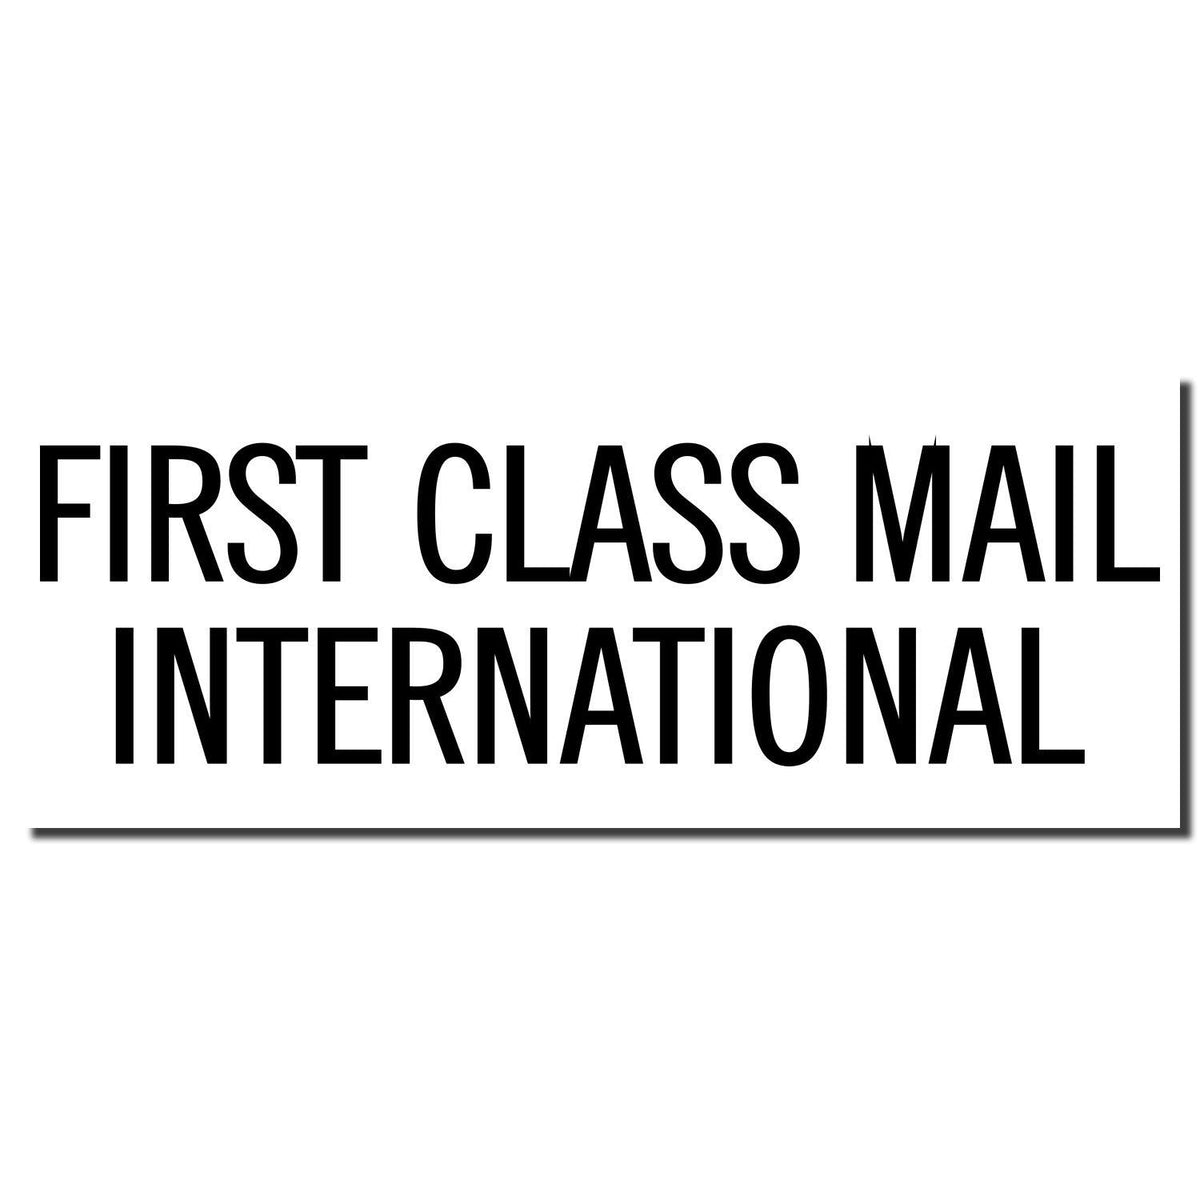 Enlarged Imprint Large First Class Mail International Rubber Stamp Sample